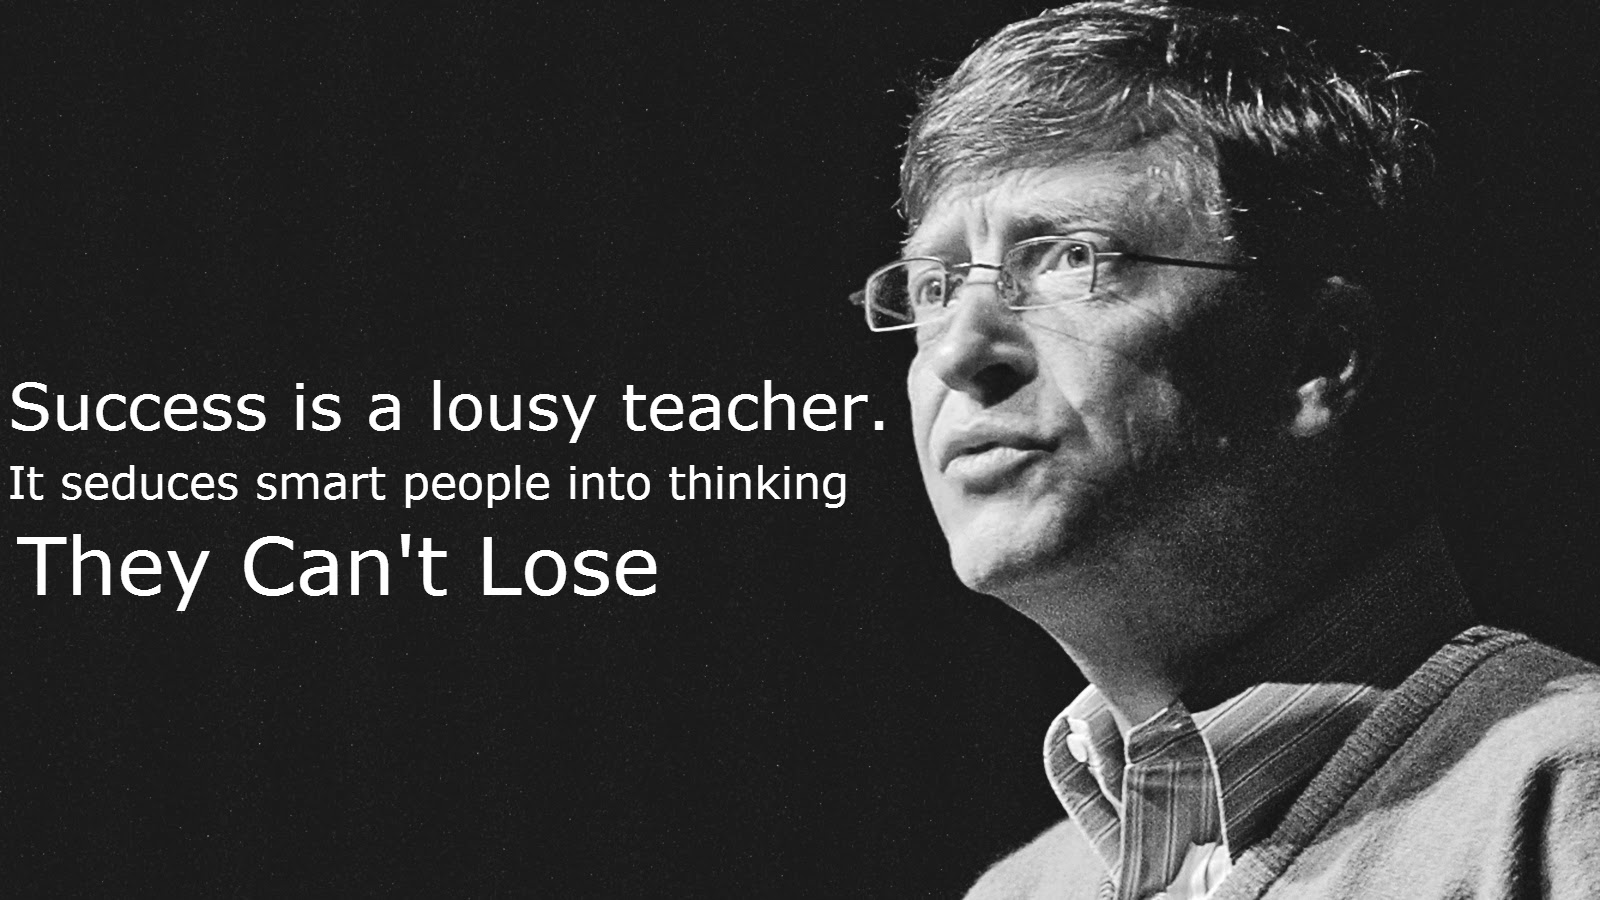 Bill Gates famous quote